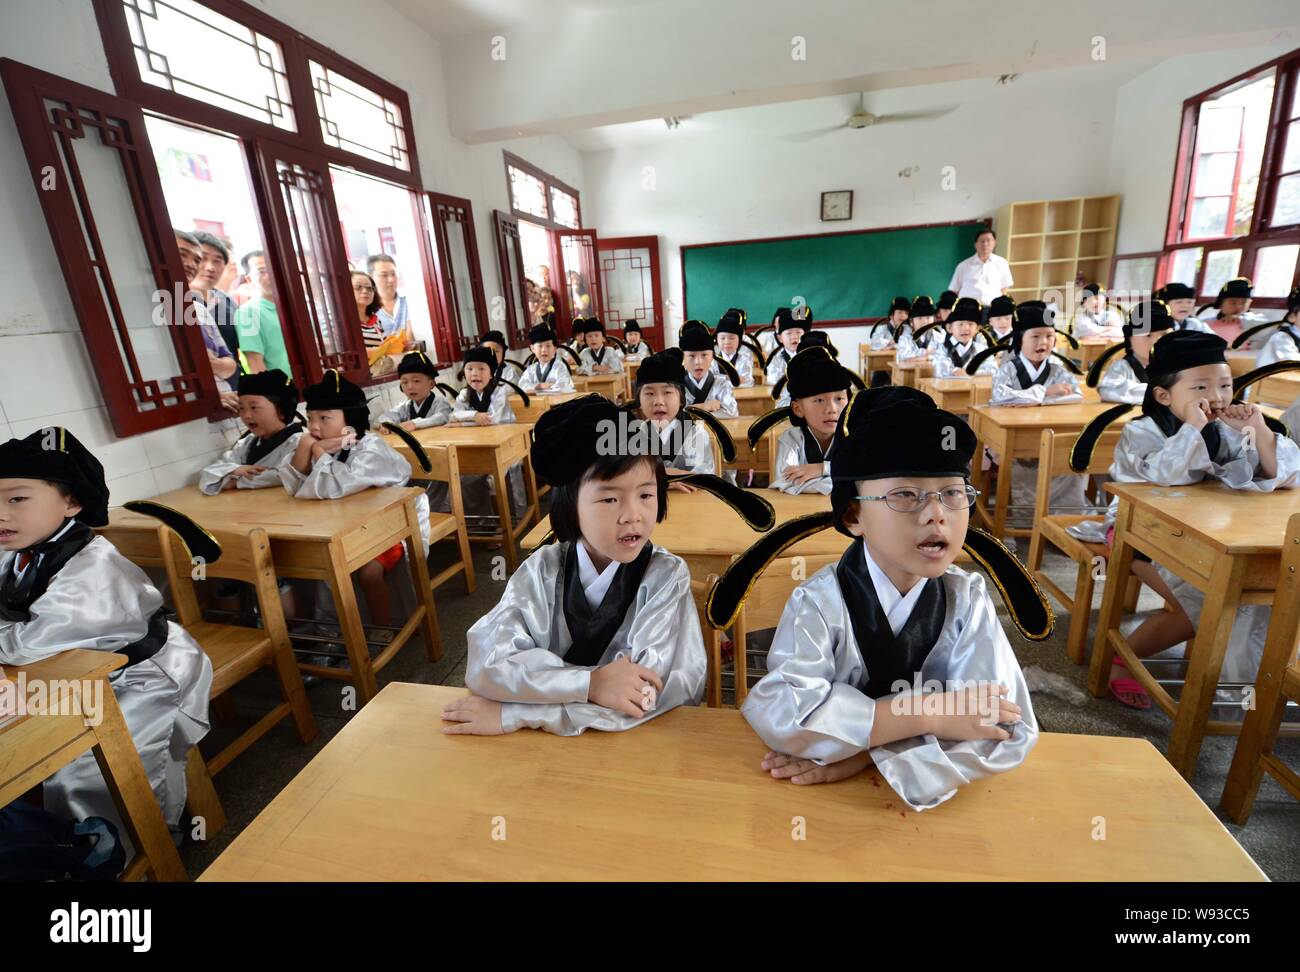 First-grade pupils wearing traditional Chinese uniforms sit in a classroom after the first writing ceremony of a new semester at Fuzimiao, or the Conf Stock Photo